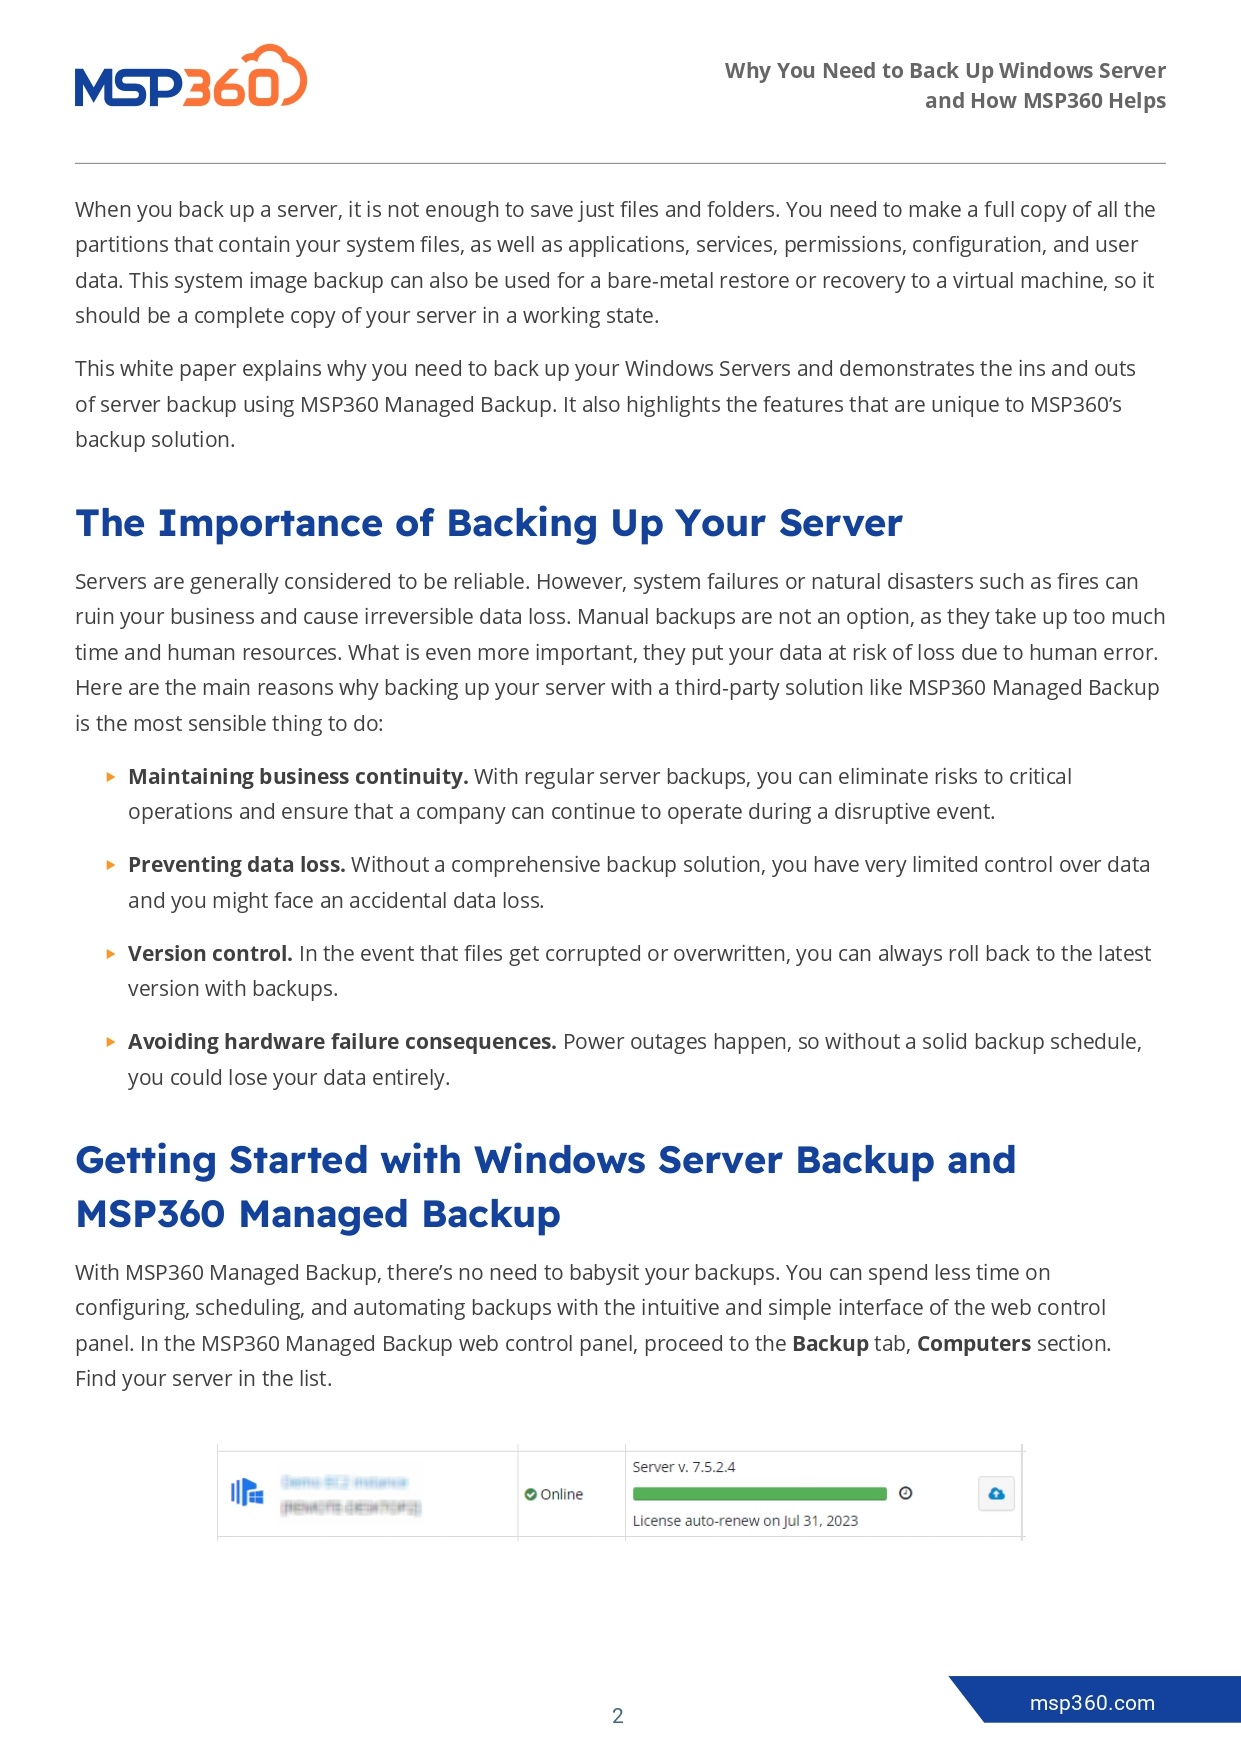 Why You Need to Back Up Windows Server and How MSP360 Helps - 2